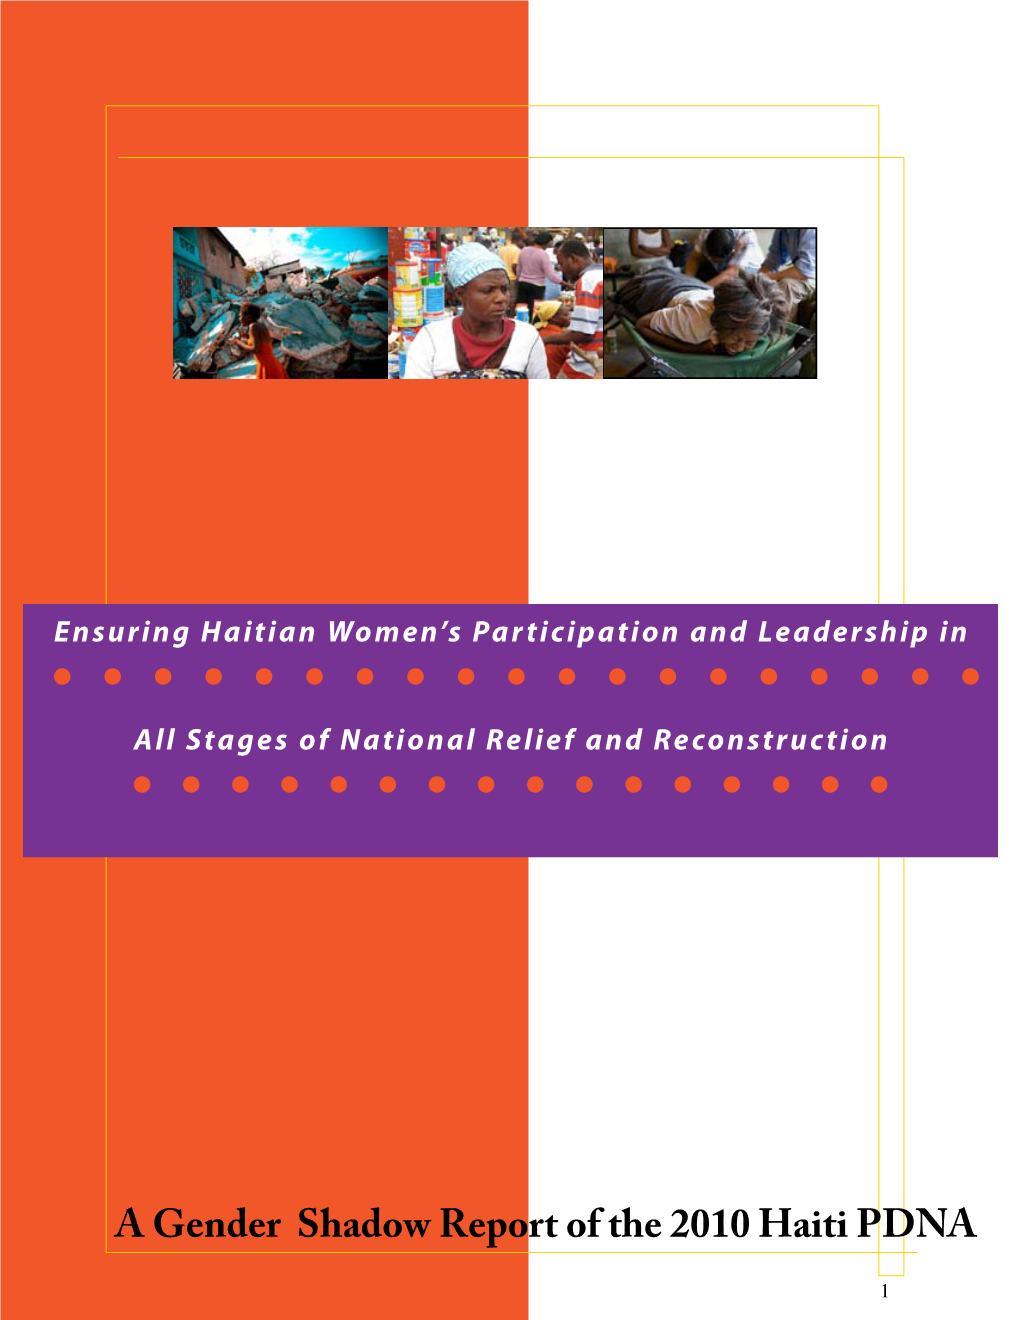 A Gender Shadow Report of the 2010 Haiti PDNA